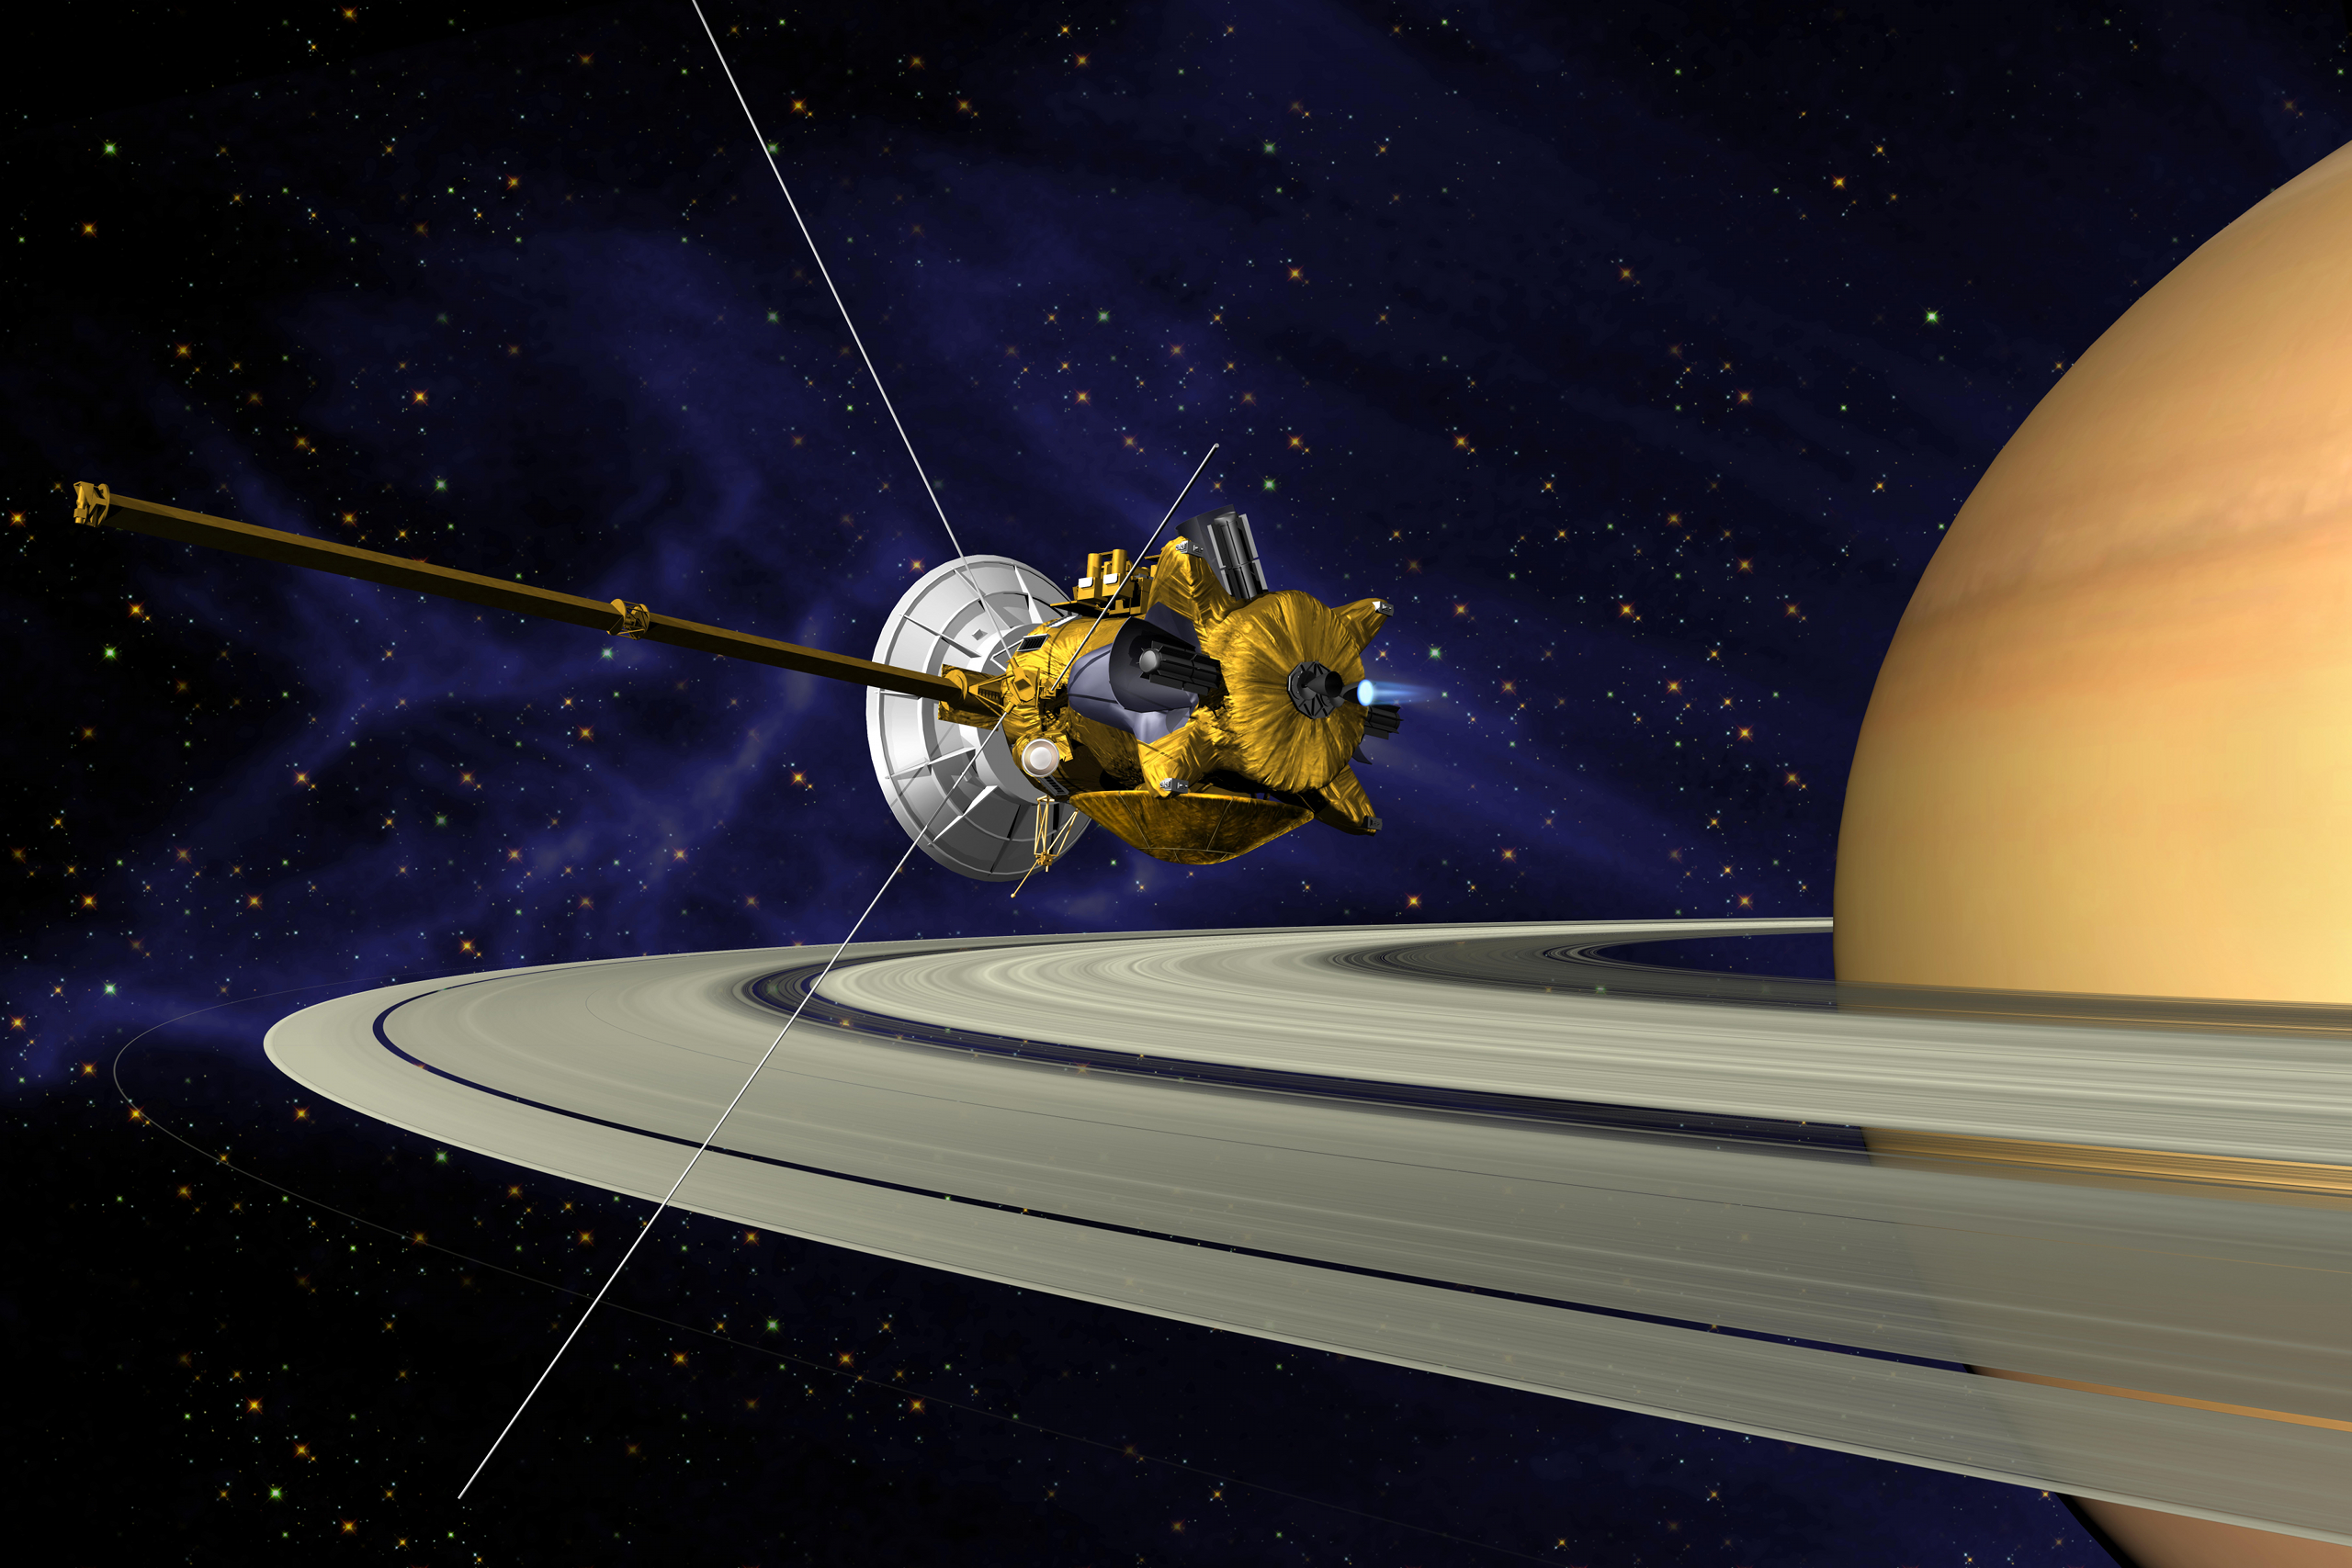 The Cassini probe will descend into Saturn today ending a 20 year mission